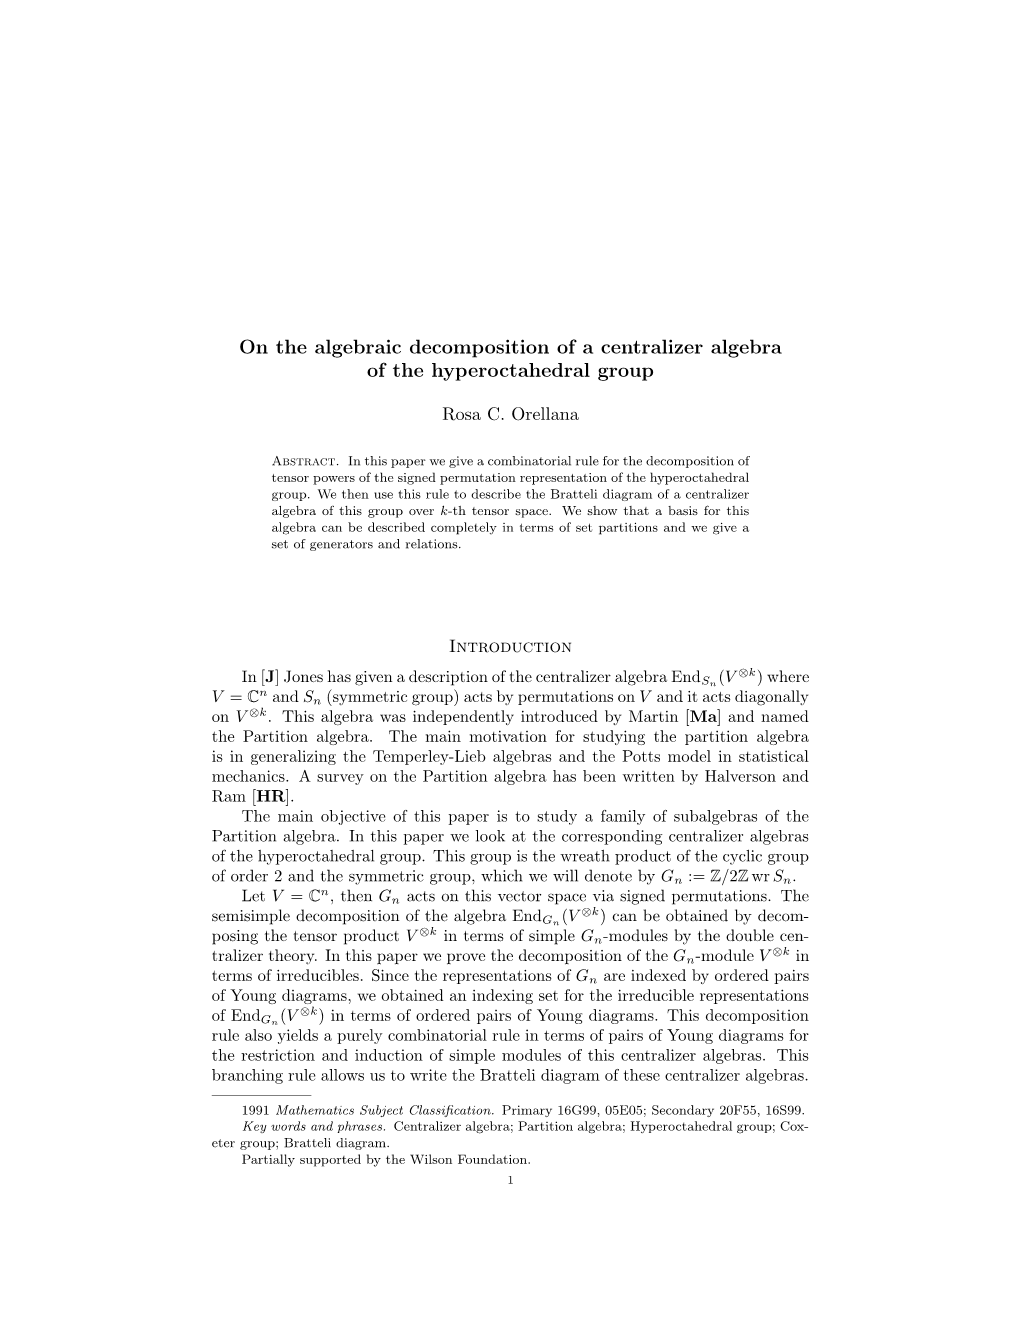 On the Algebraic Decomposition of a Centralizer Algebra of the Hyperoctahedral Group